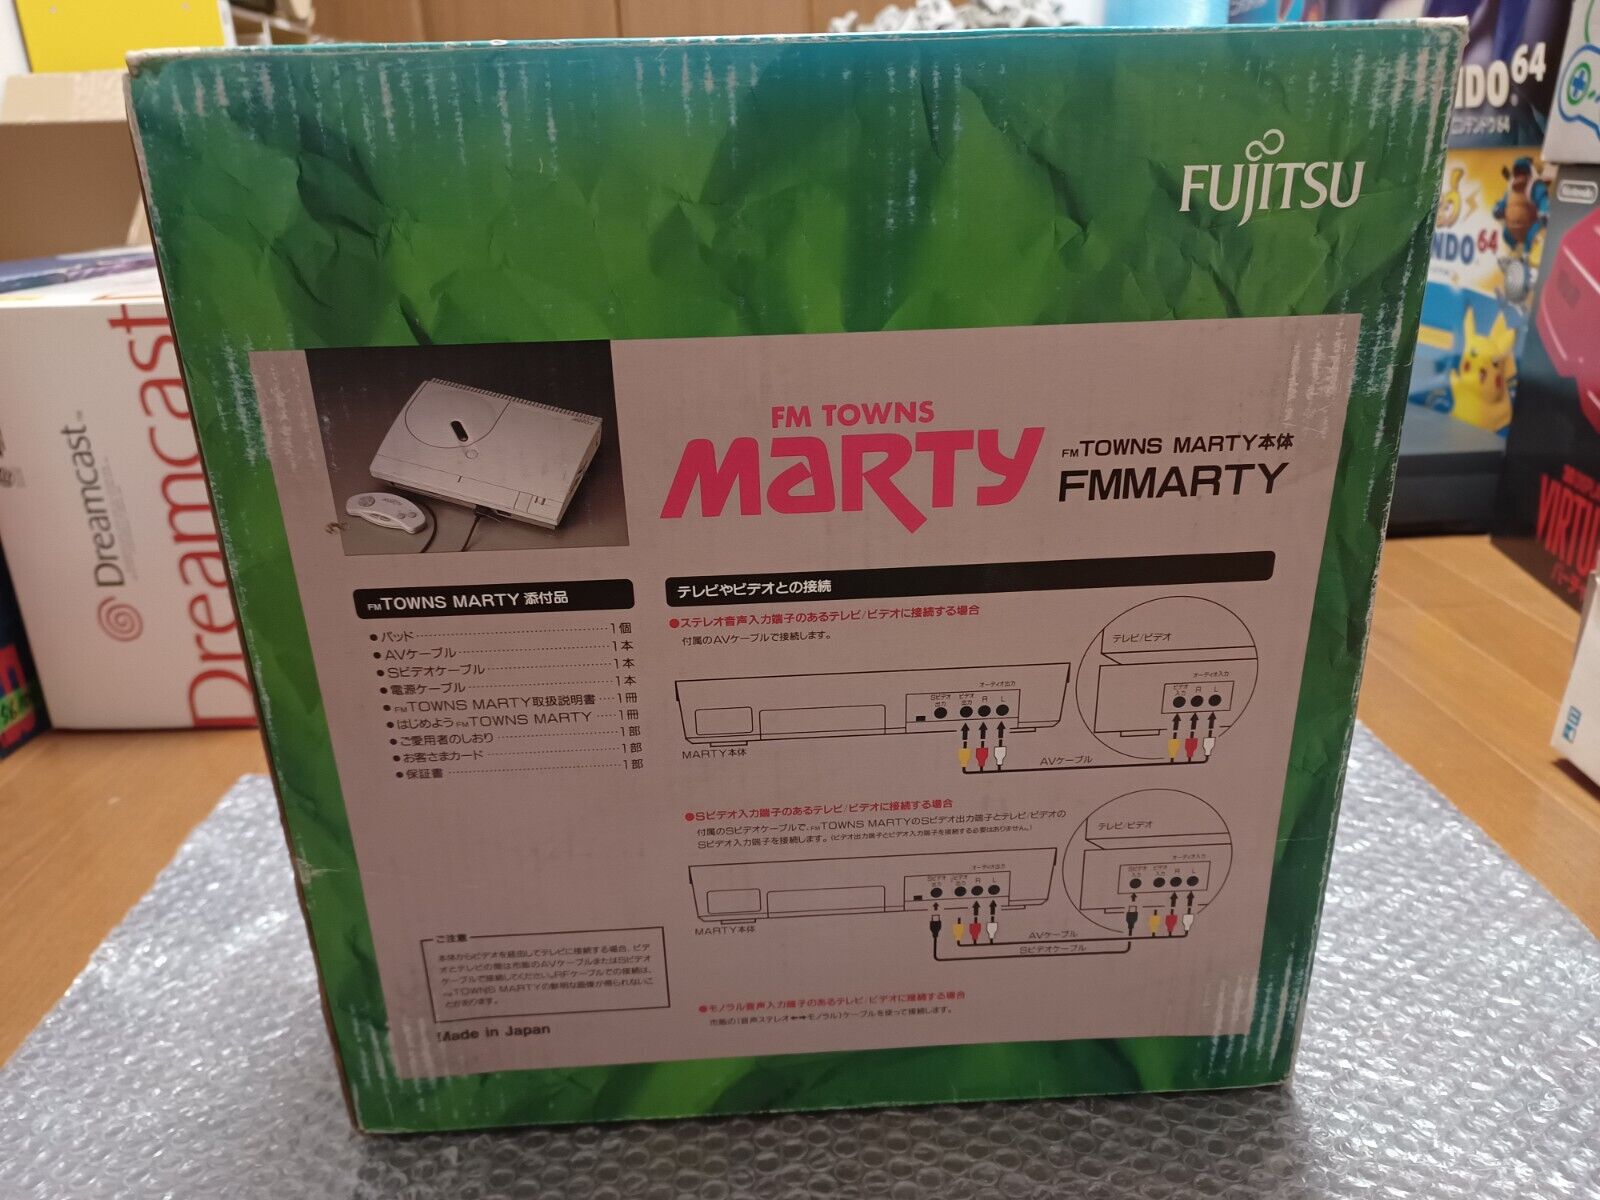 NEW Fujitsu FM Towns Marty Console System Japan *MIRACLE ITEM FOR  COLLECTION*